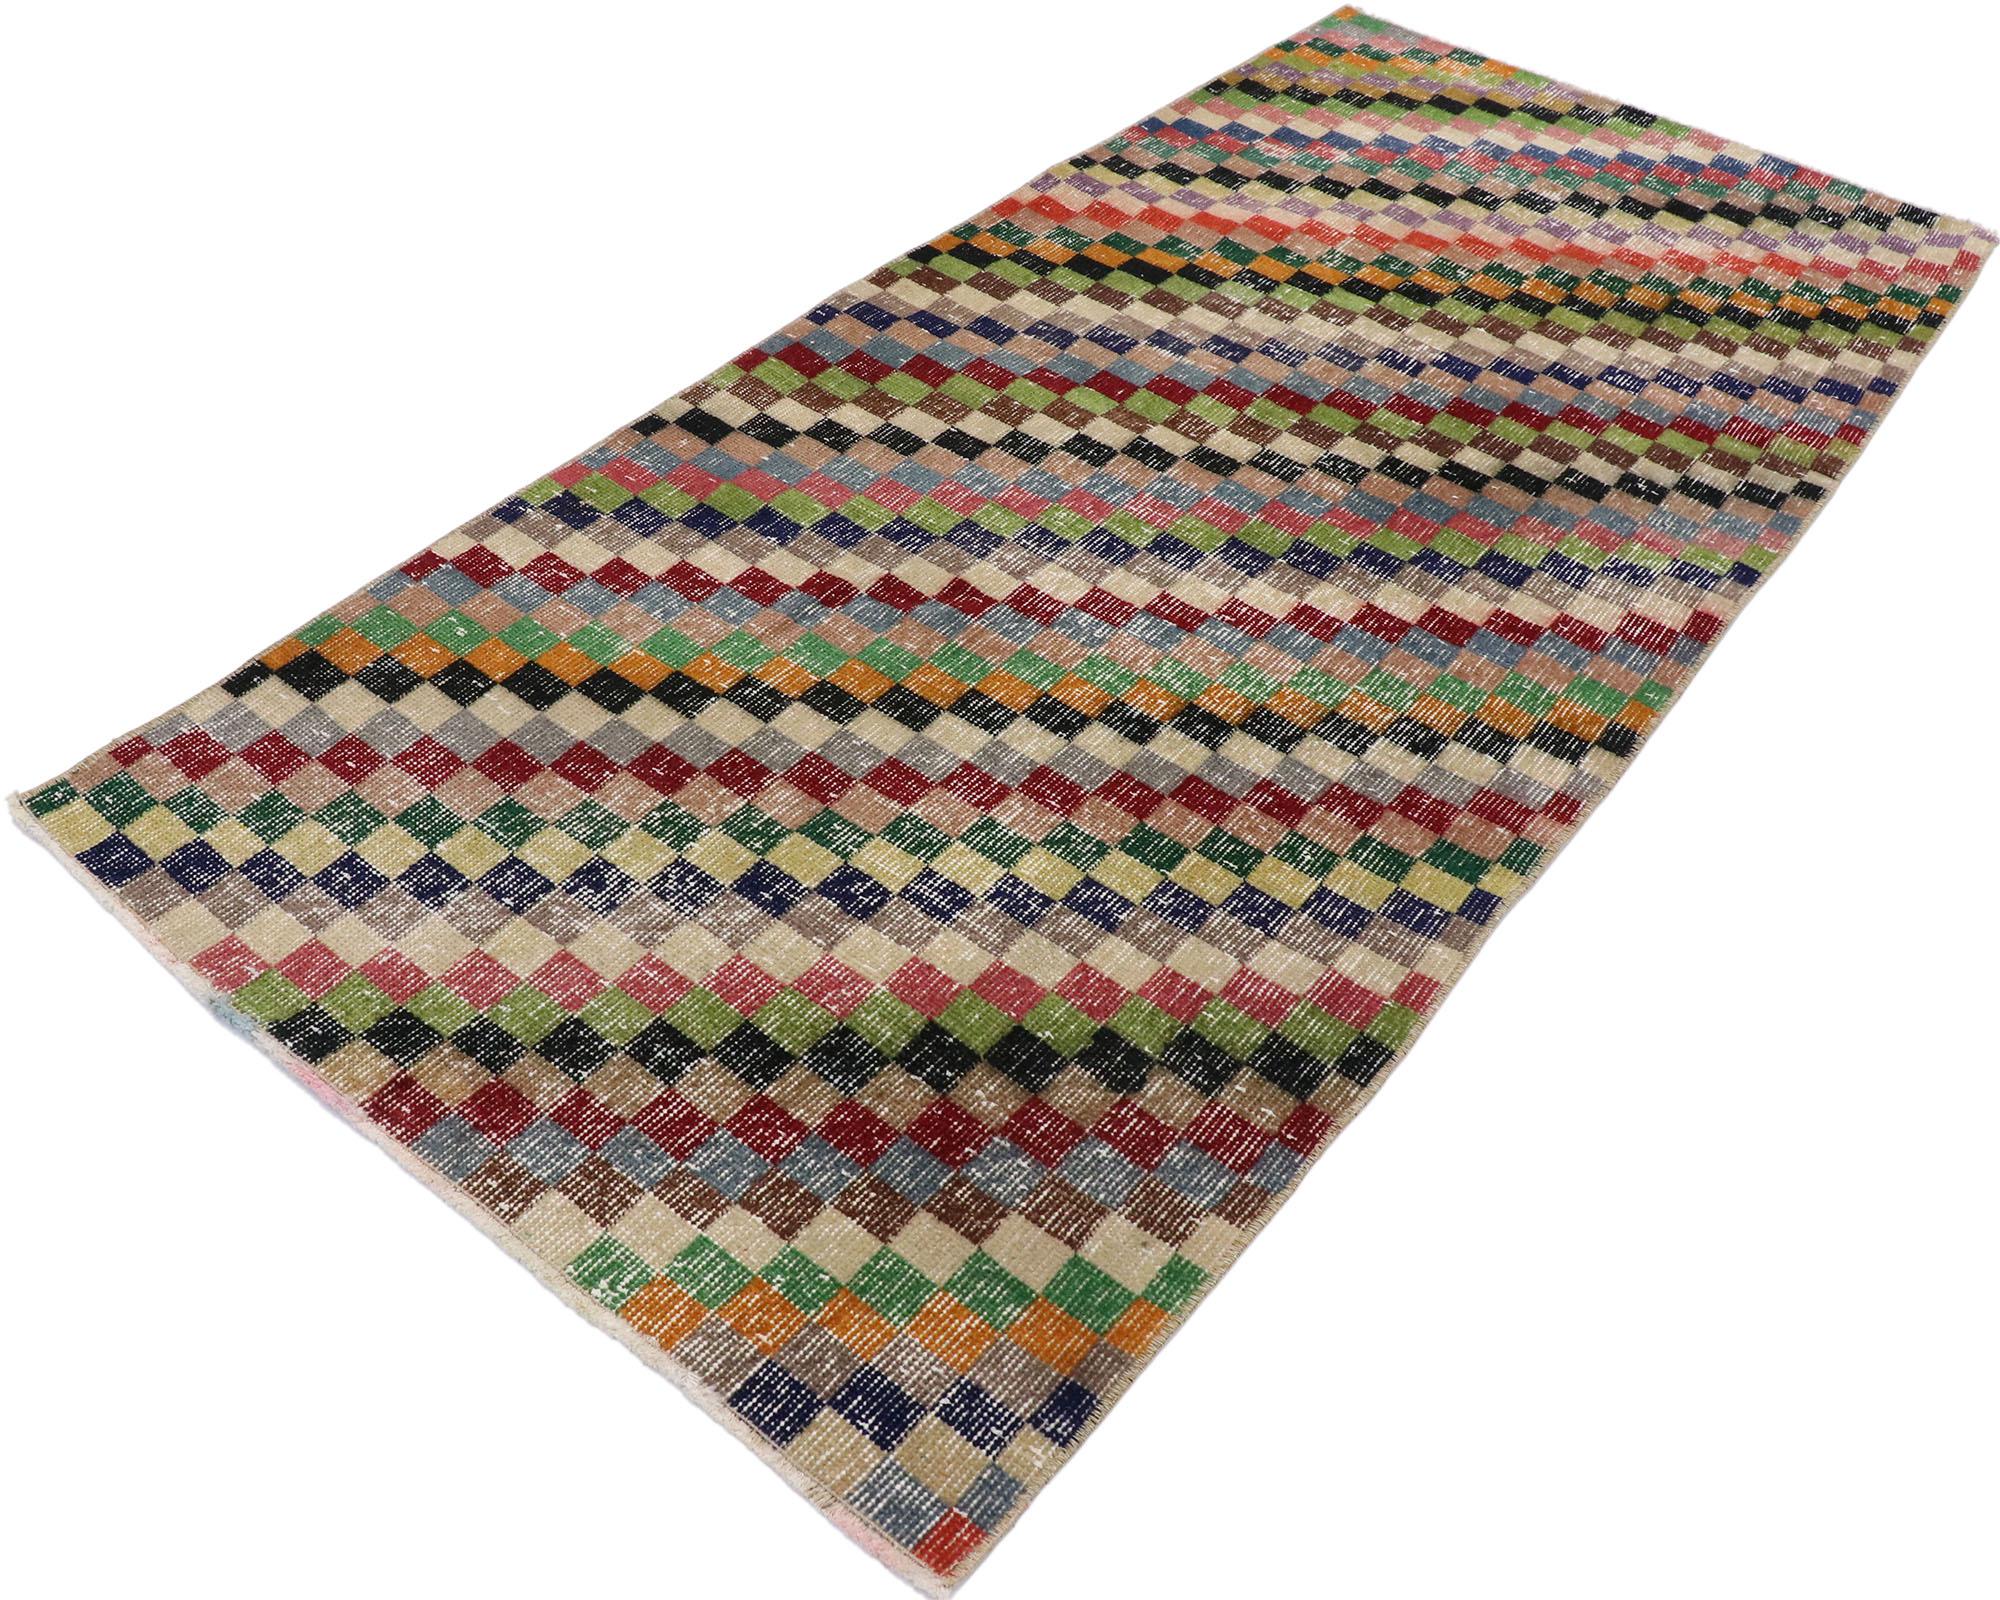 53319, distressed vintage Turkish Sivas rug with Rustic Postmodern style. This hand knotted wool distressed vintage Turkish Sivas rug features an all-over checkered diagonal stripe pattern comprised of rows of multi-colored diamonds. Each row of